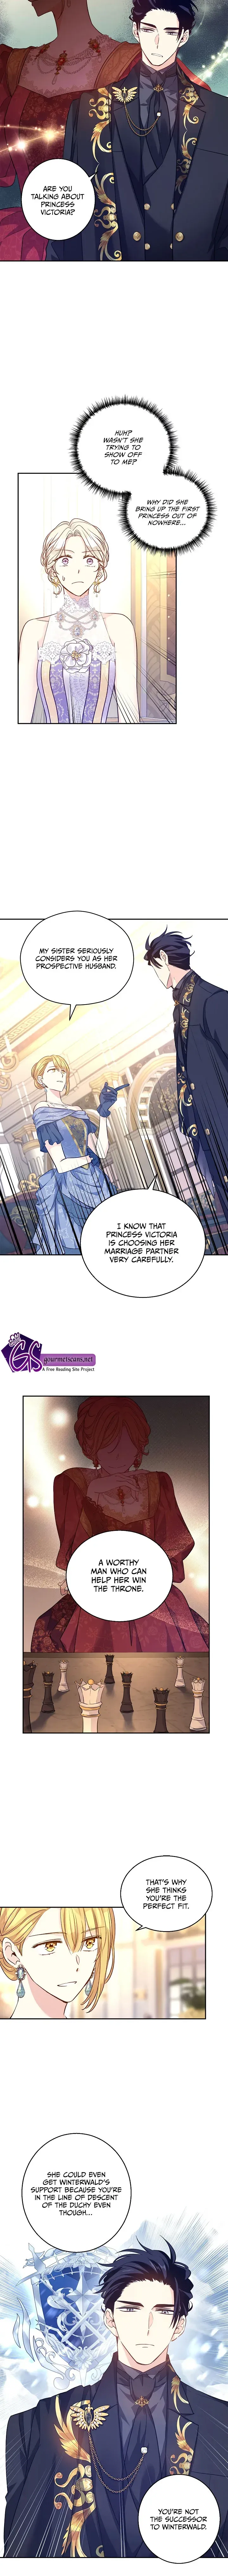 I Will Change The Genre (It’s Time to Change the Genre) Chapter 56 page 3 - MangaWeebs.in